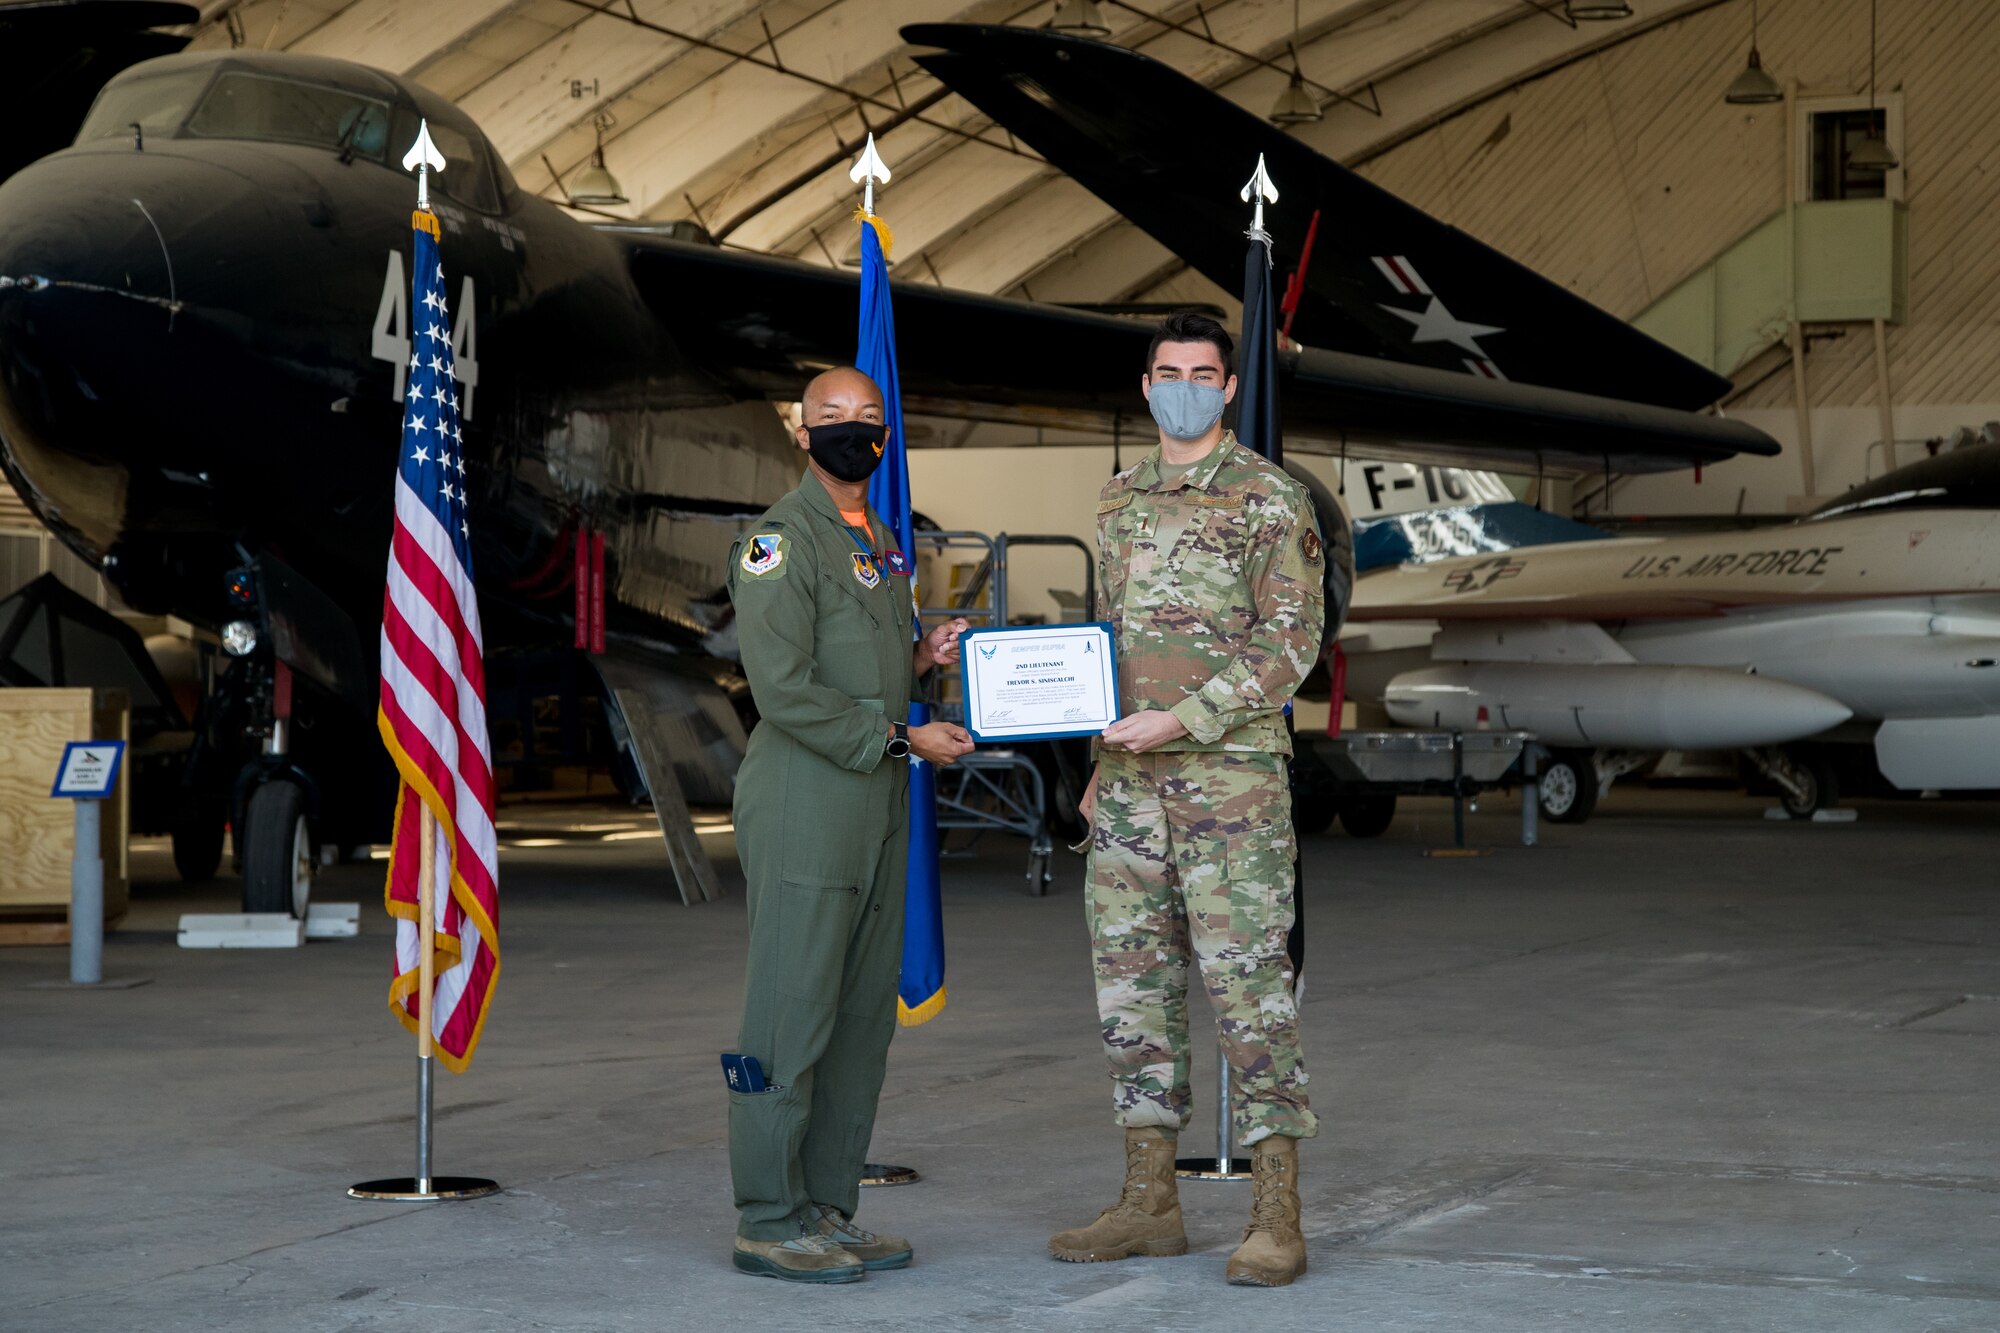 2nd Lt. Trevor Siniscalchi, Air Force Research Laboratory, originally of San Diego, California, accepts his U.S. Space Force certificate from Col. Randel Gordon, 412th Test Wing Vice Commander, during a Space Force Transfer Ceremony at Edwards Air Force Base, California, Feb. 11. (Air Force photo by Richard Gonzales)